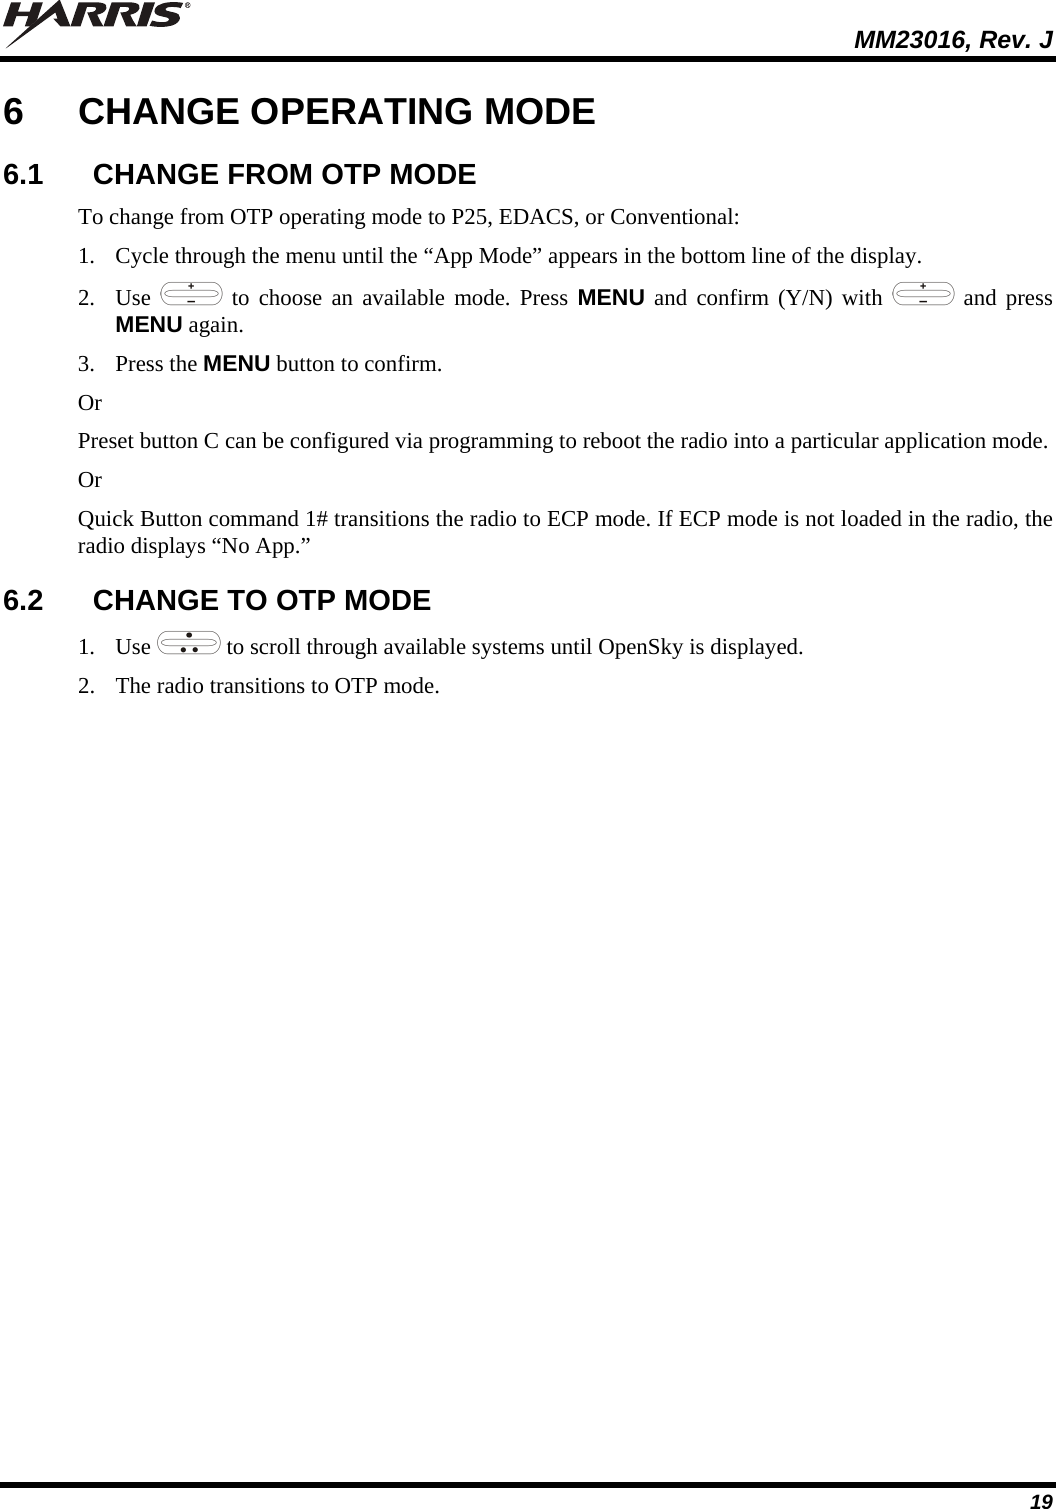  MM23016, Rev. J 19 6  CHANGE OPERATING MODE 6.1  CHANGE FROM OTP MODE To change from OTP operating mode to P25, EDACS, or Conventional: 1. Cycle through the menu until the “App Mode” appears in the bottom line of the display. 2. Use   to choose an available mode. Press MENU and confirm (Y/N) with   and press MENU again. 3. Press the MENU button to confirm.  Or Preset button C can be configured via programming to reboot the radio into a particular application mode. Or Quick Button command 1# transitions the radio to ECP mode. If ECP mode is not loaded in the radio, the radio displays “No App.” 6.2  CHANGE TO OTP MODE 1. Use   to scroll through available systems until OpenSky is displayed.  2. The radio transitions to OTP mode.  